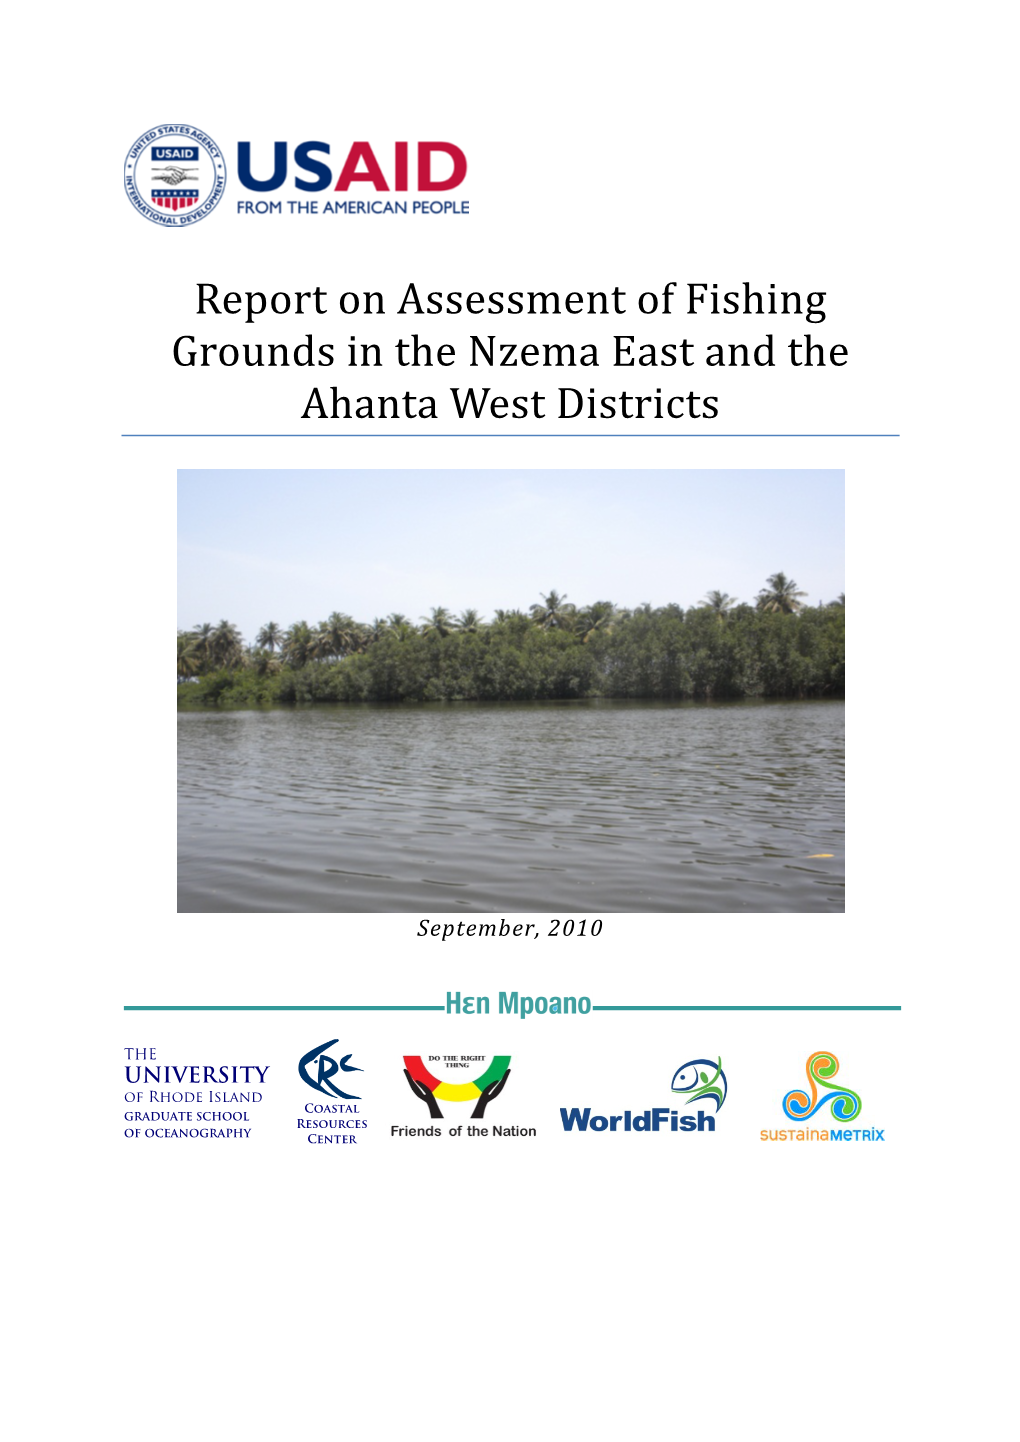 Report on Assessment of Fishing Grounds in the Nzema East and the Ahanta West Districts